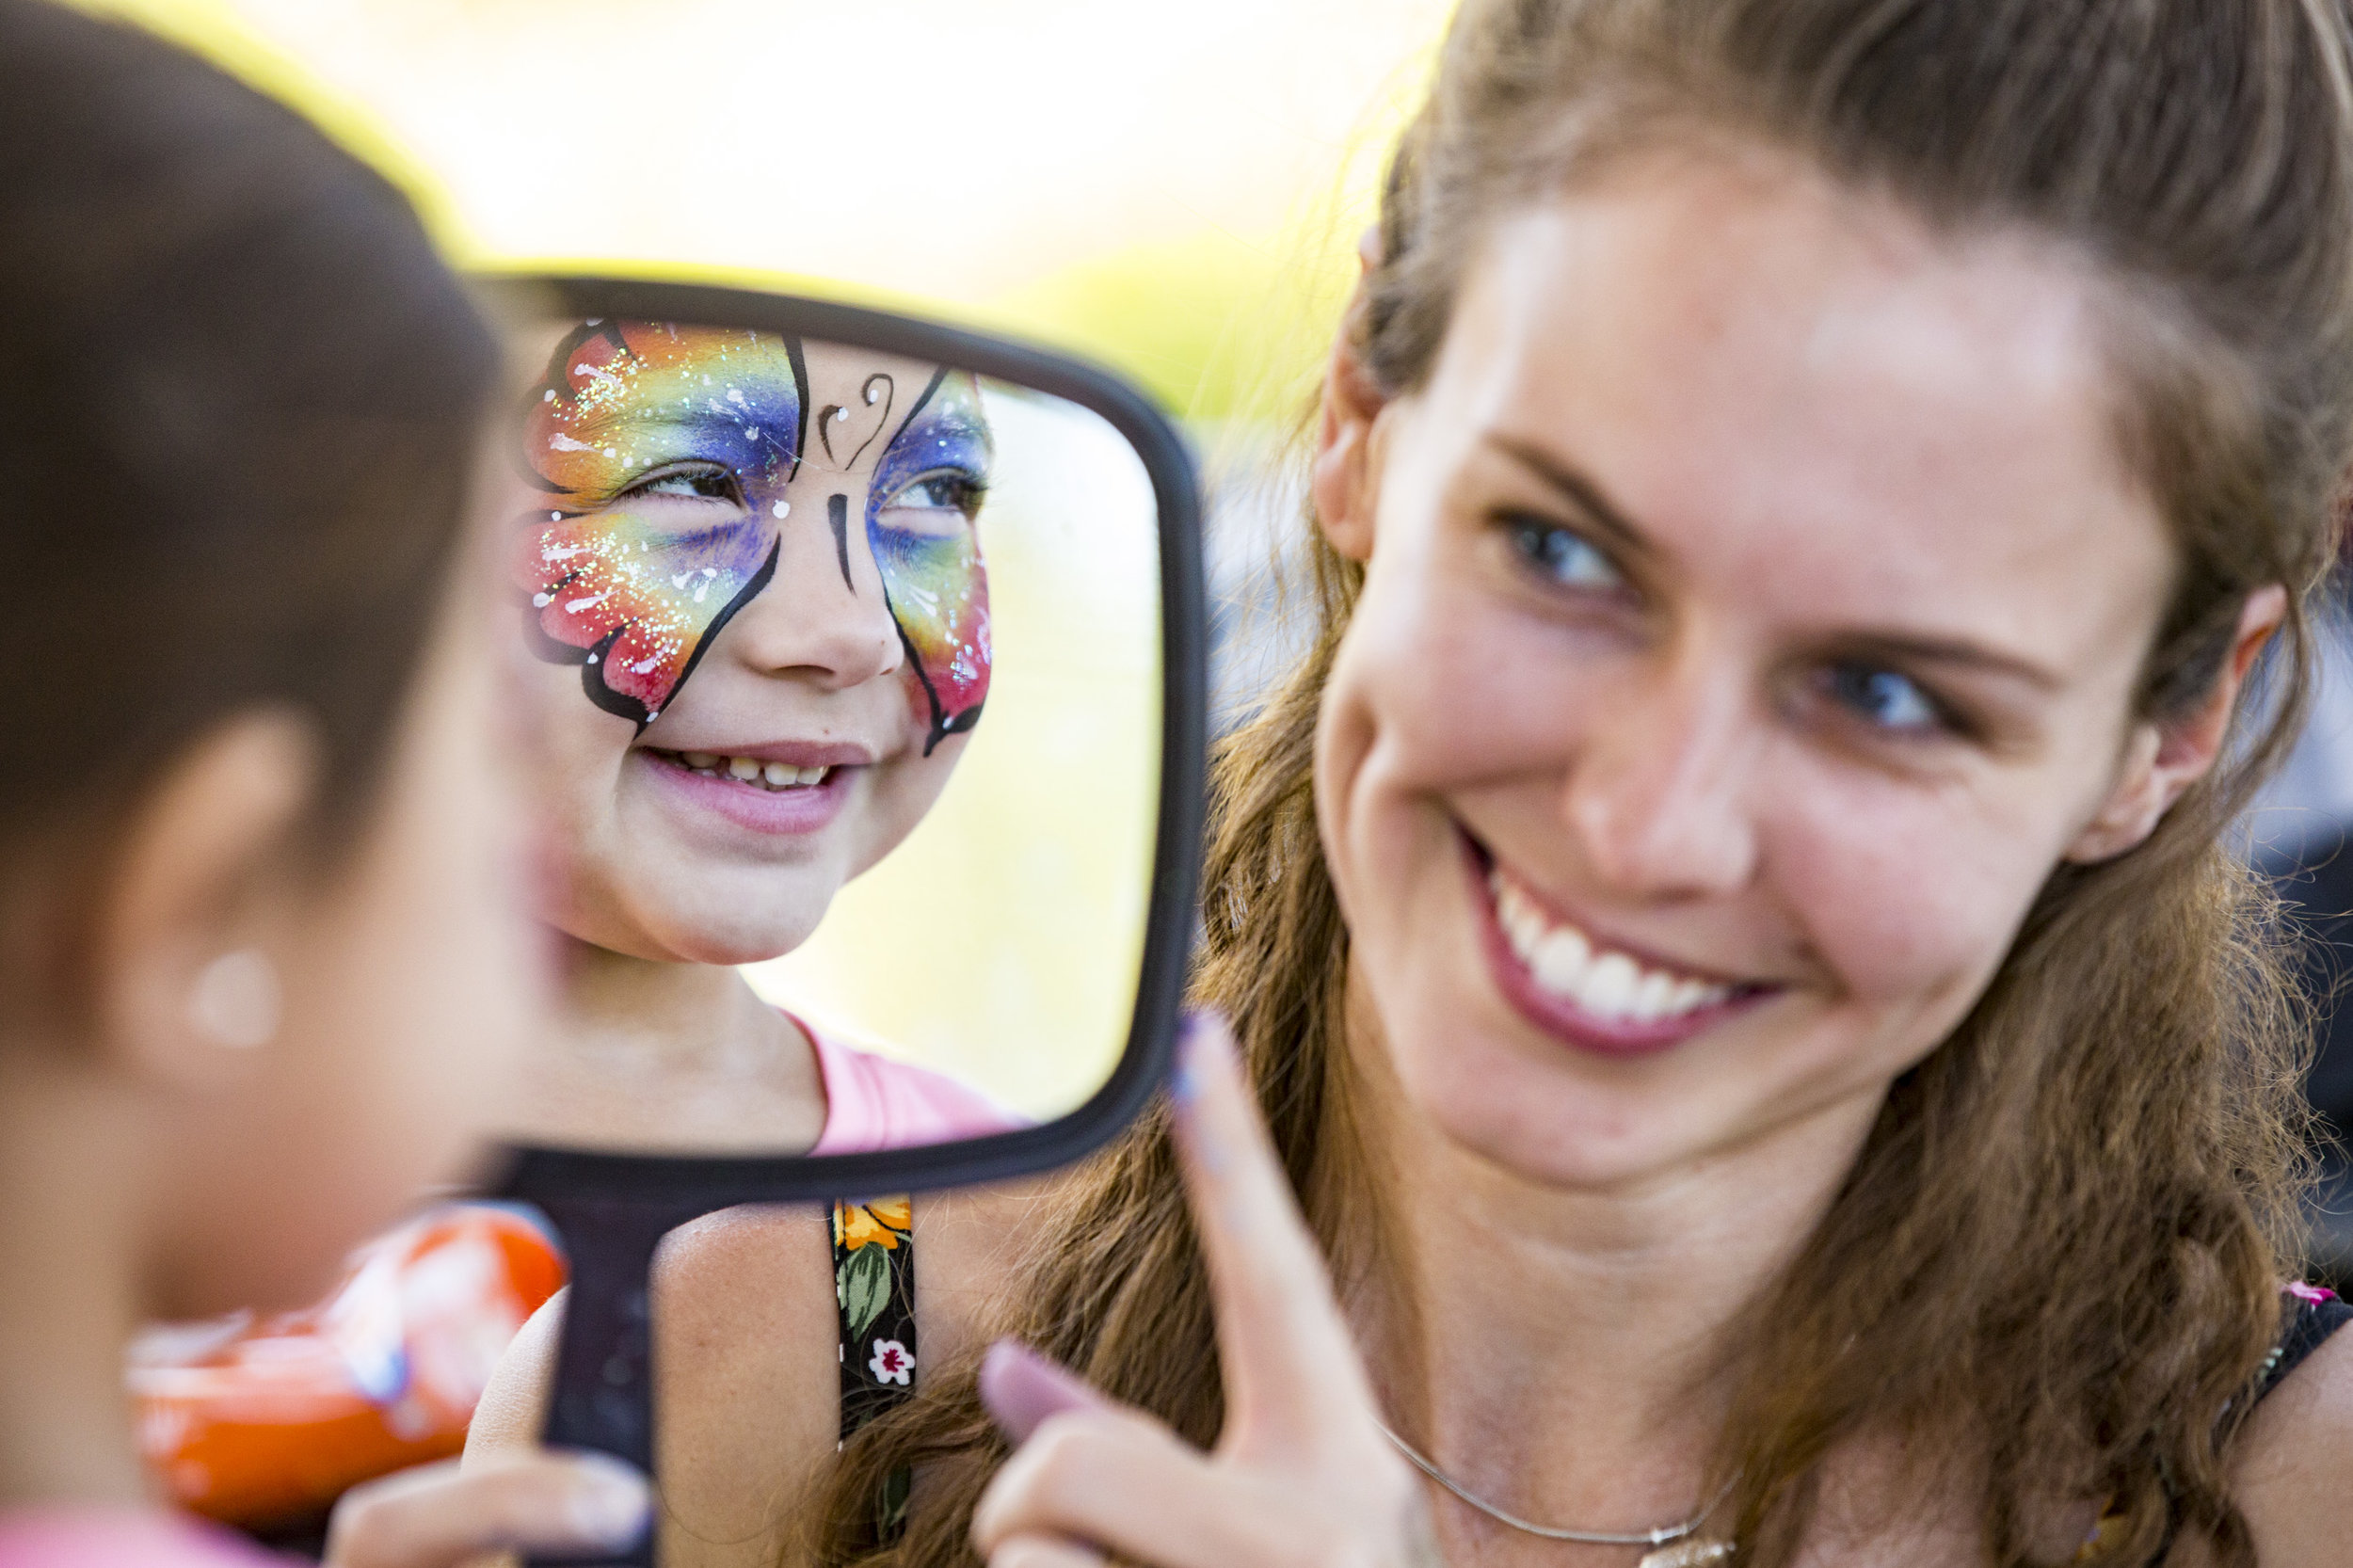  Sophia Brumfield, 4, reacts to her reflection after getting her face painted by Leela Woodham of Easyjourney Entertainment during the 13th annual Butterfly Festival at the Florida Museum of Natural History on October 13, 2018. 